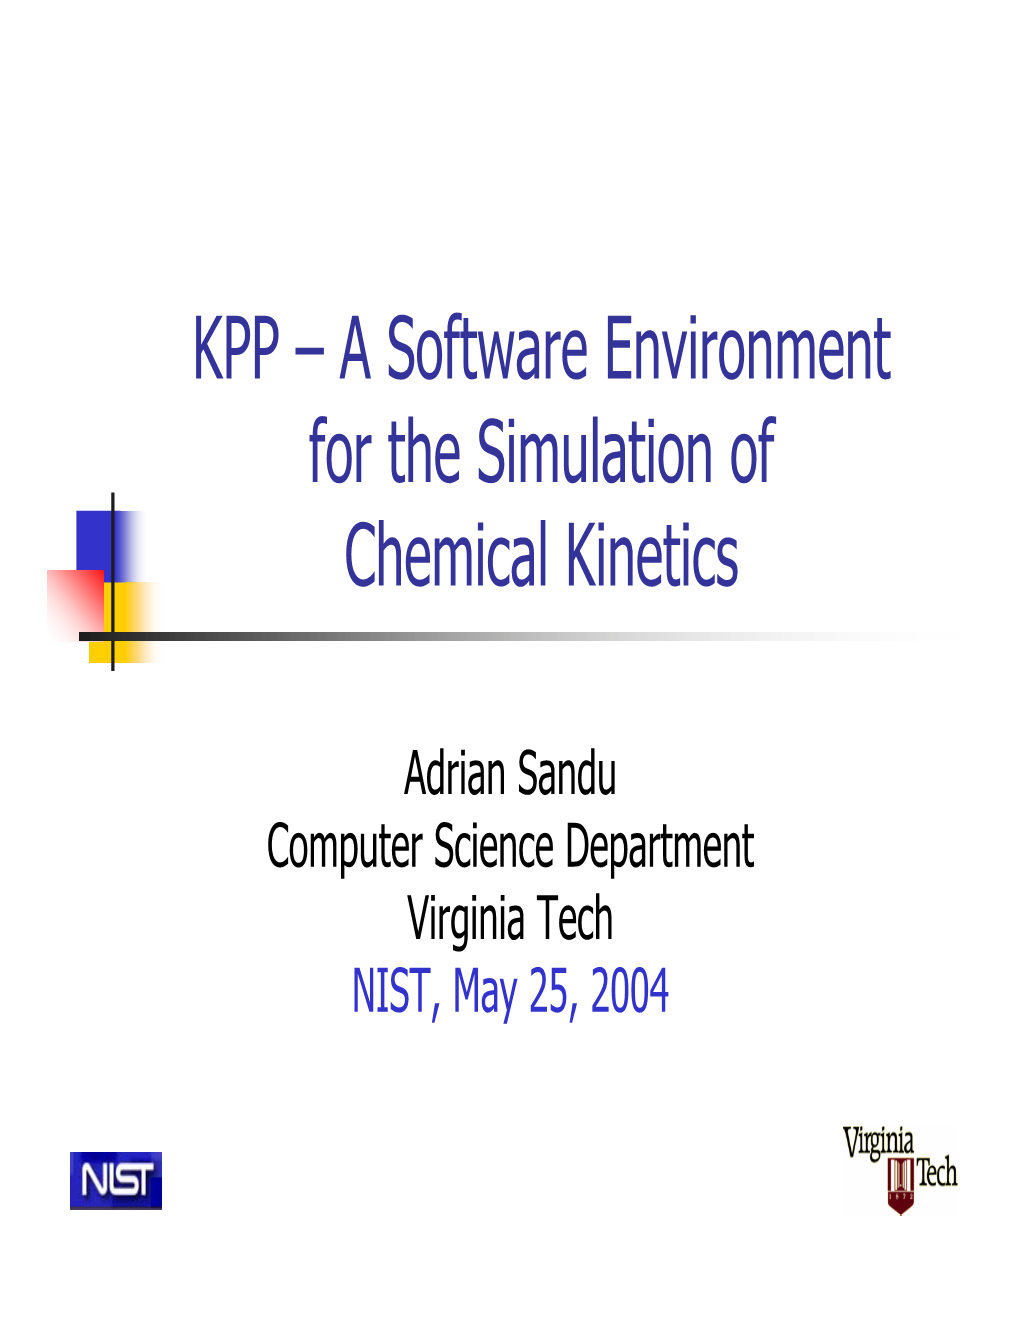 KPP – a Software Environment for the Simulation of Chemical Kinetics